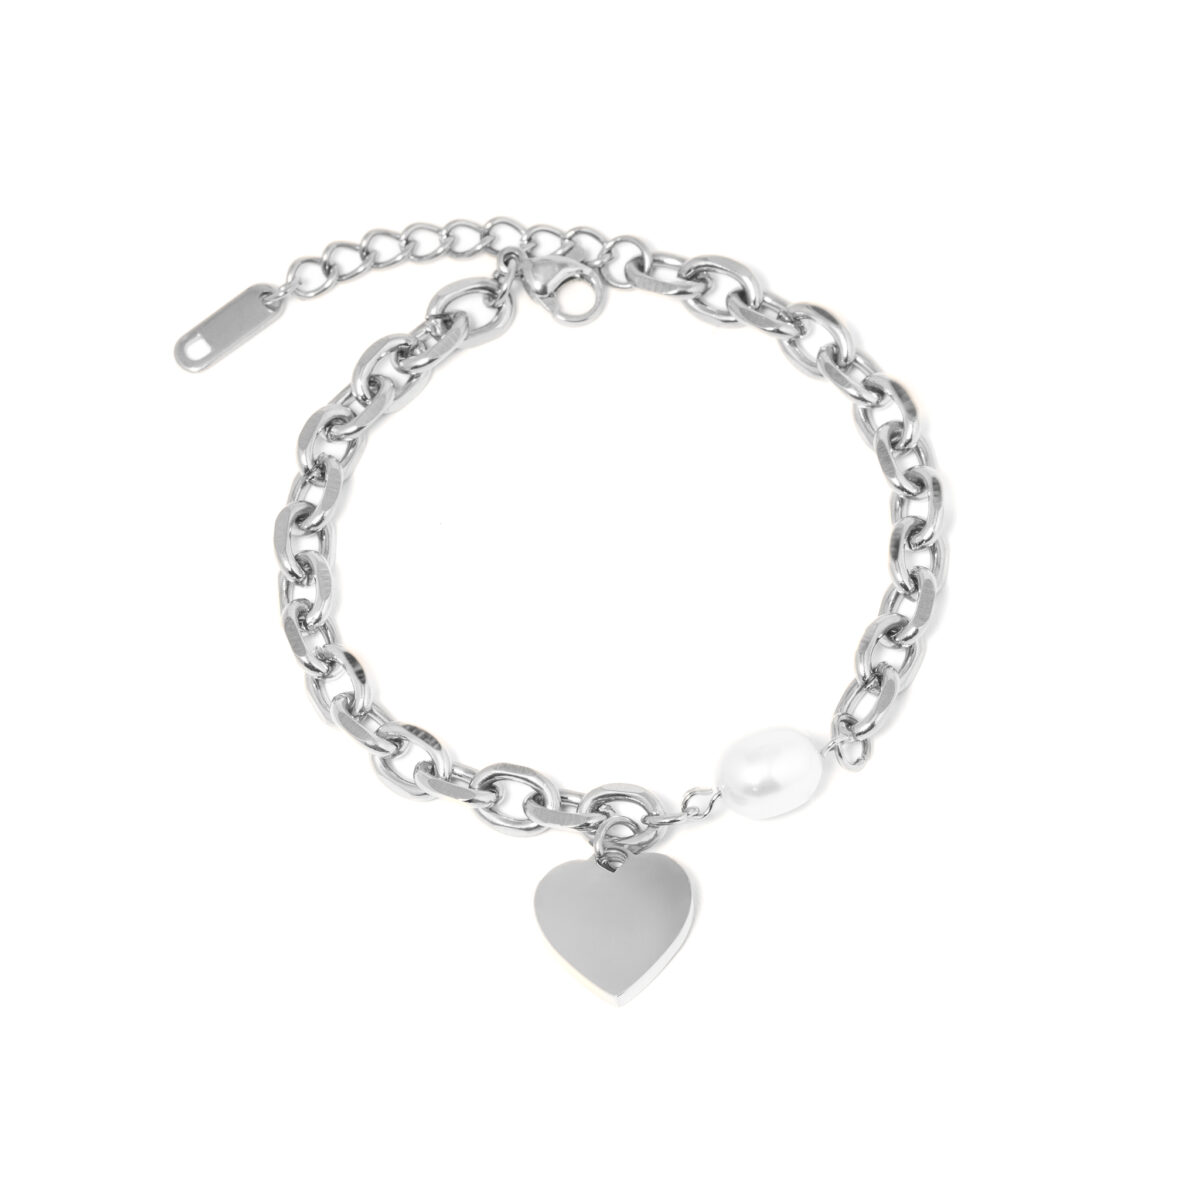 https://m.clubbella.co/product/agate-silver-heart-charm-bracelet/ Agate Silver Heart Charm Bracelet (3)